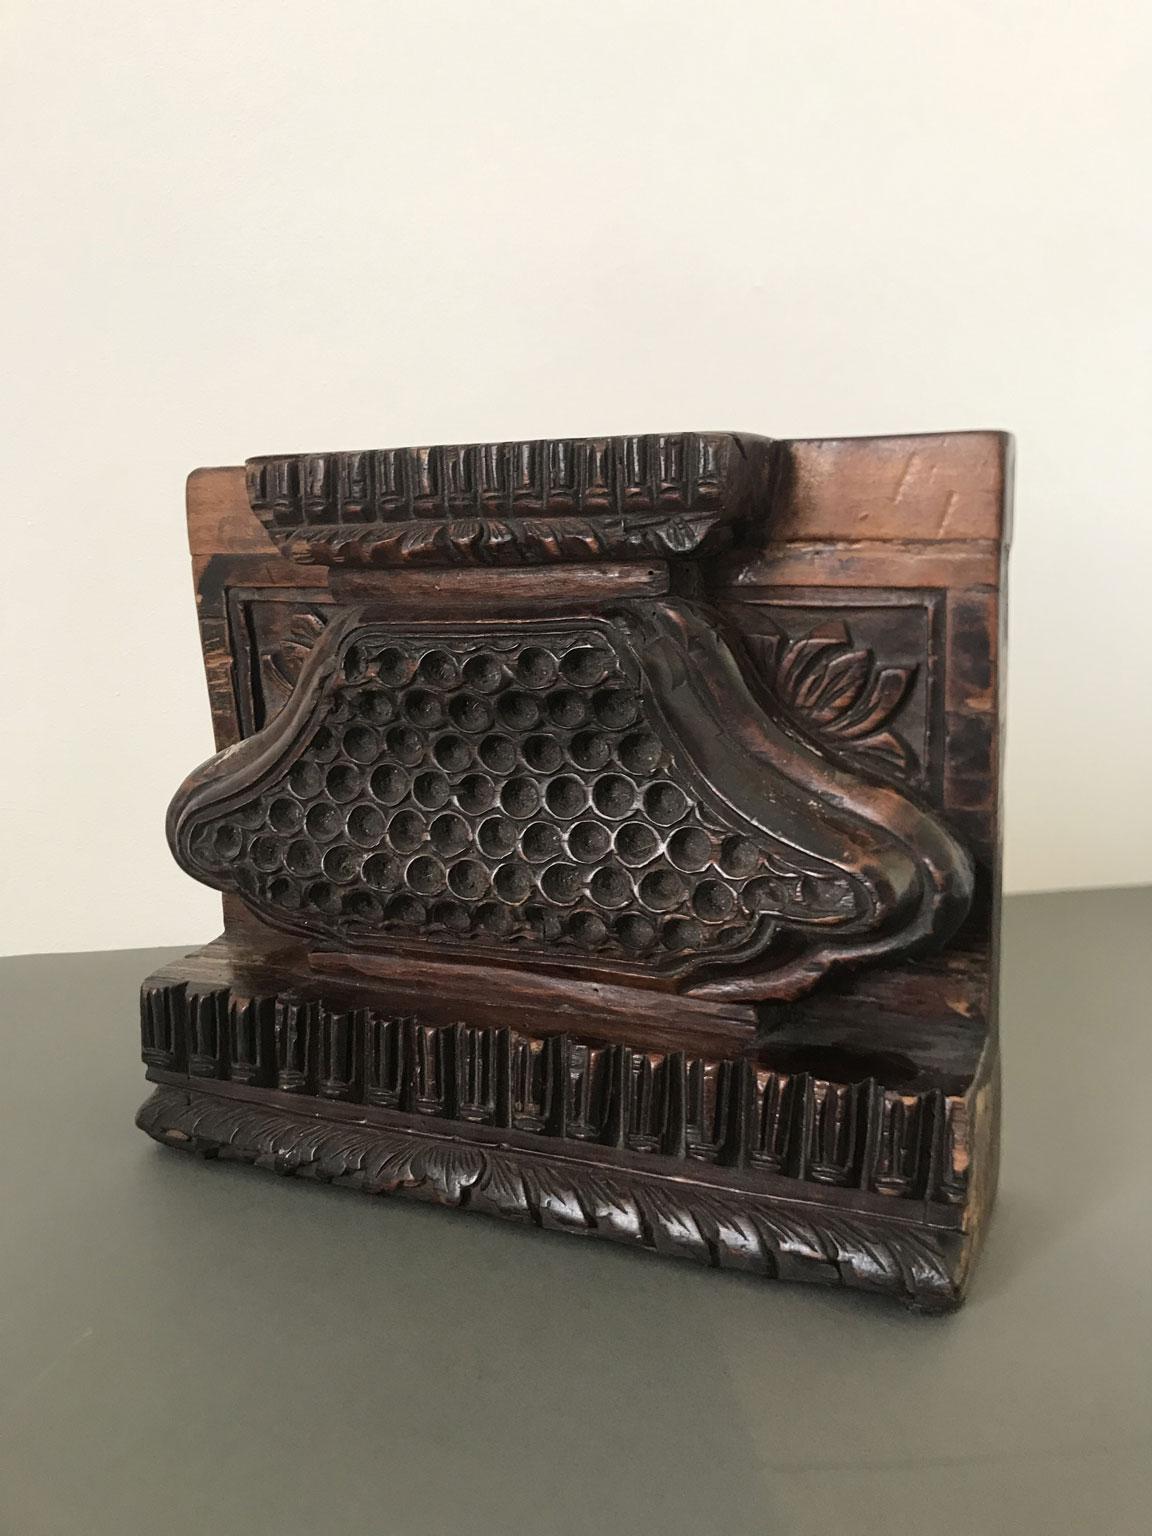 Chinese Export China Mid-18th Century Wood Hand-Carved Architectural Sculpture For Sale